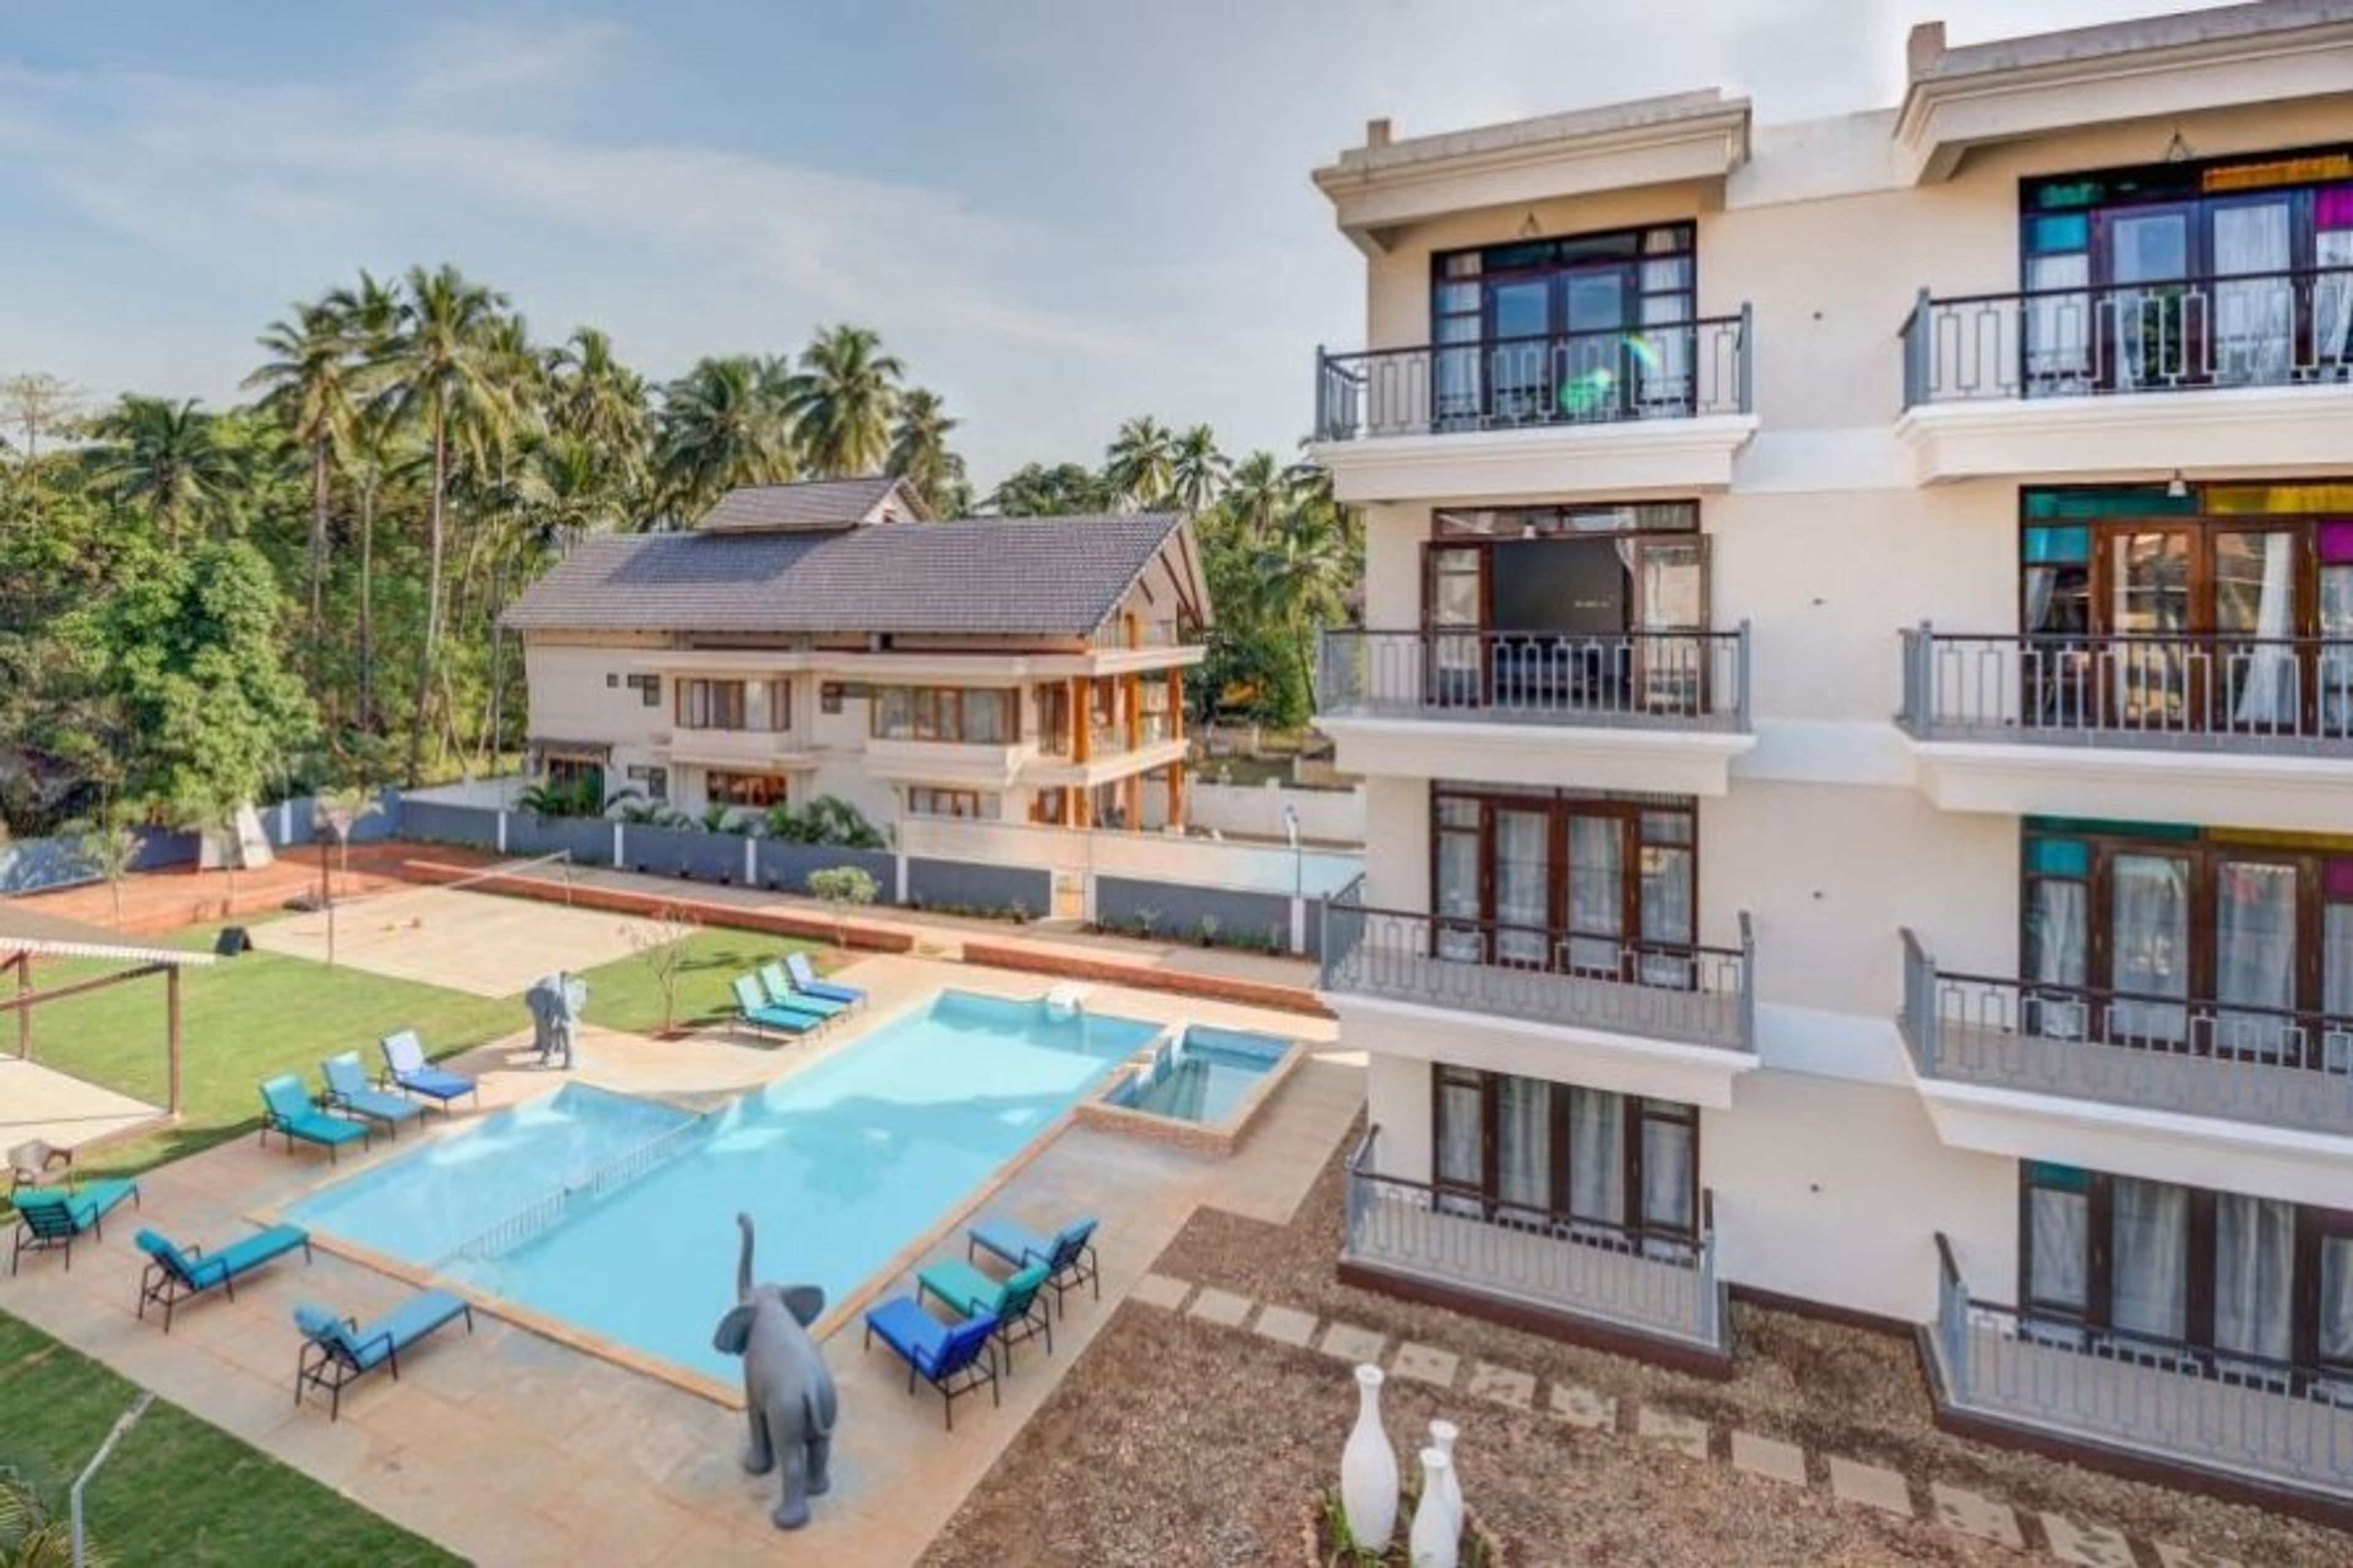 Villa with private swimming pool and kids pool for rent in Calangute